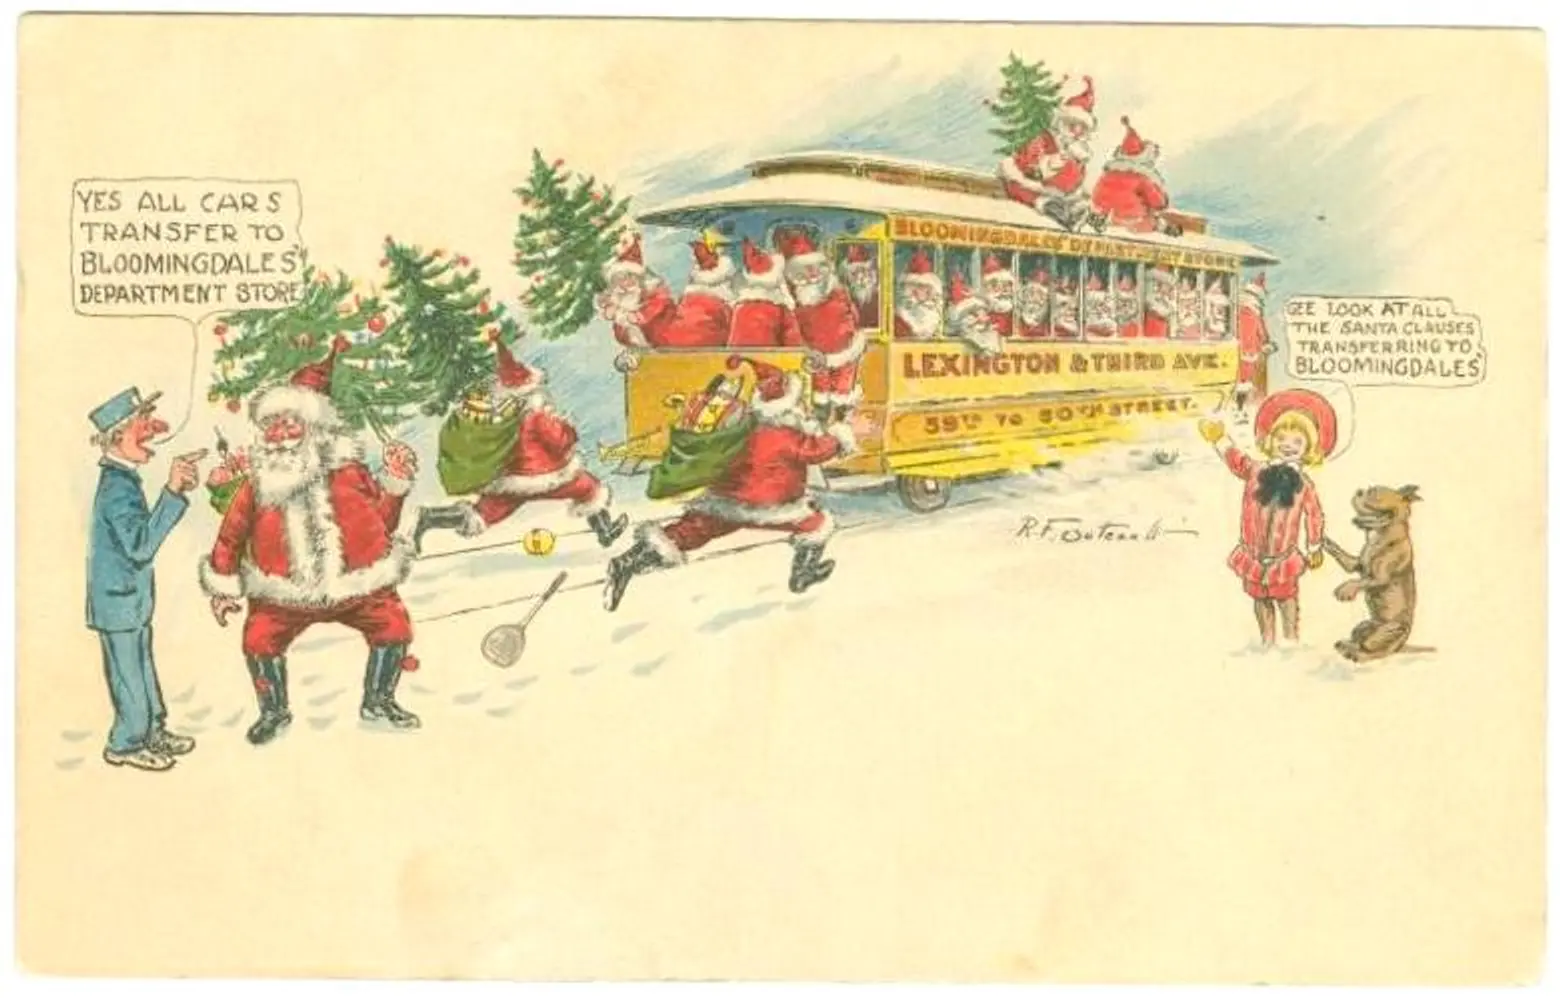 In the 1800s, a group of NYC artists and writers created the modern-day Santa Claus